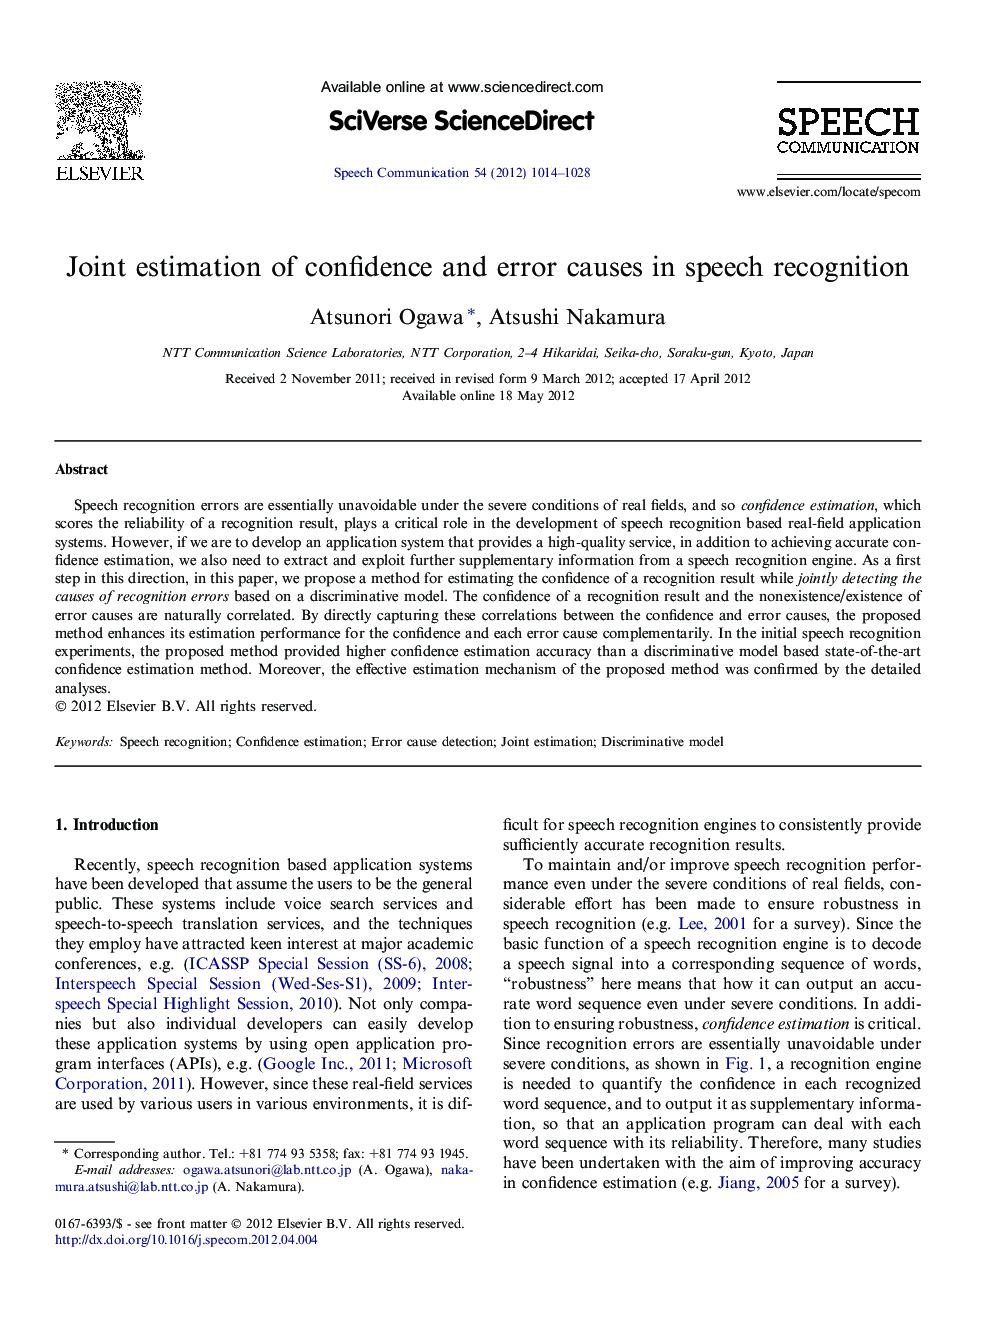 Joint estimation of confidence and error causes in speech recognition